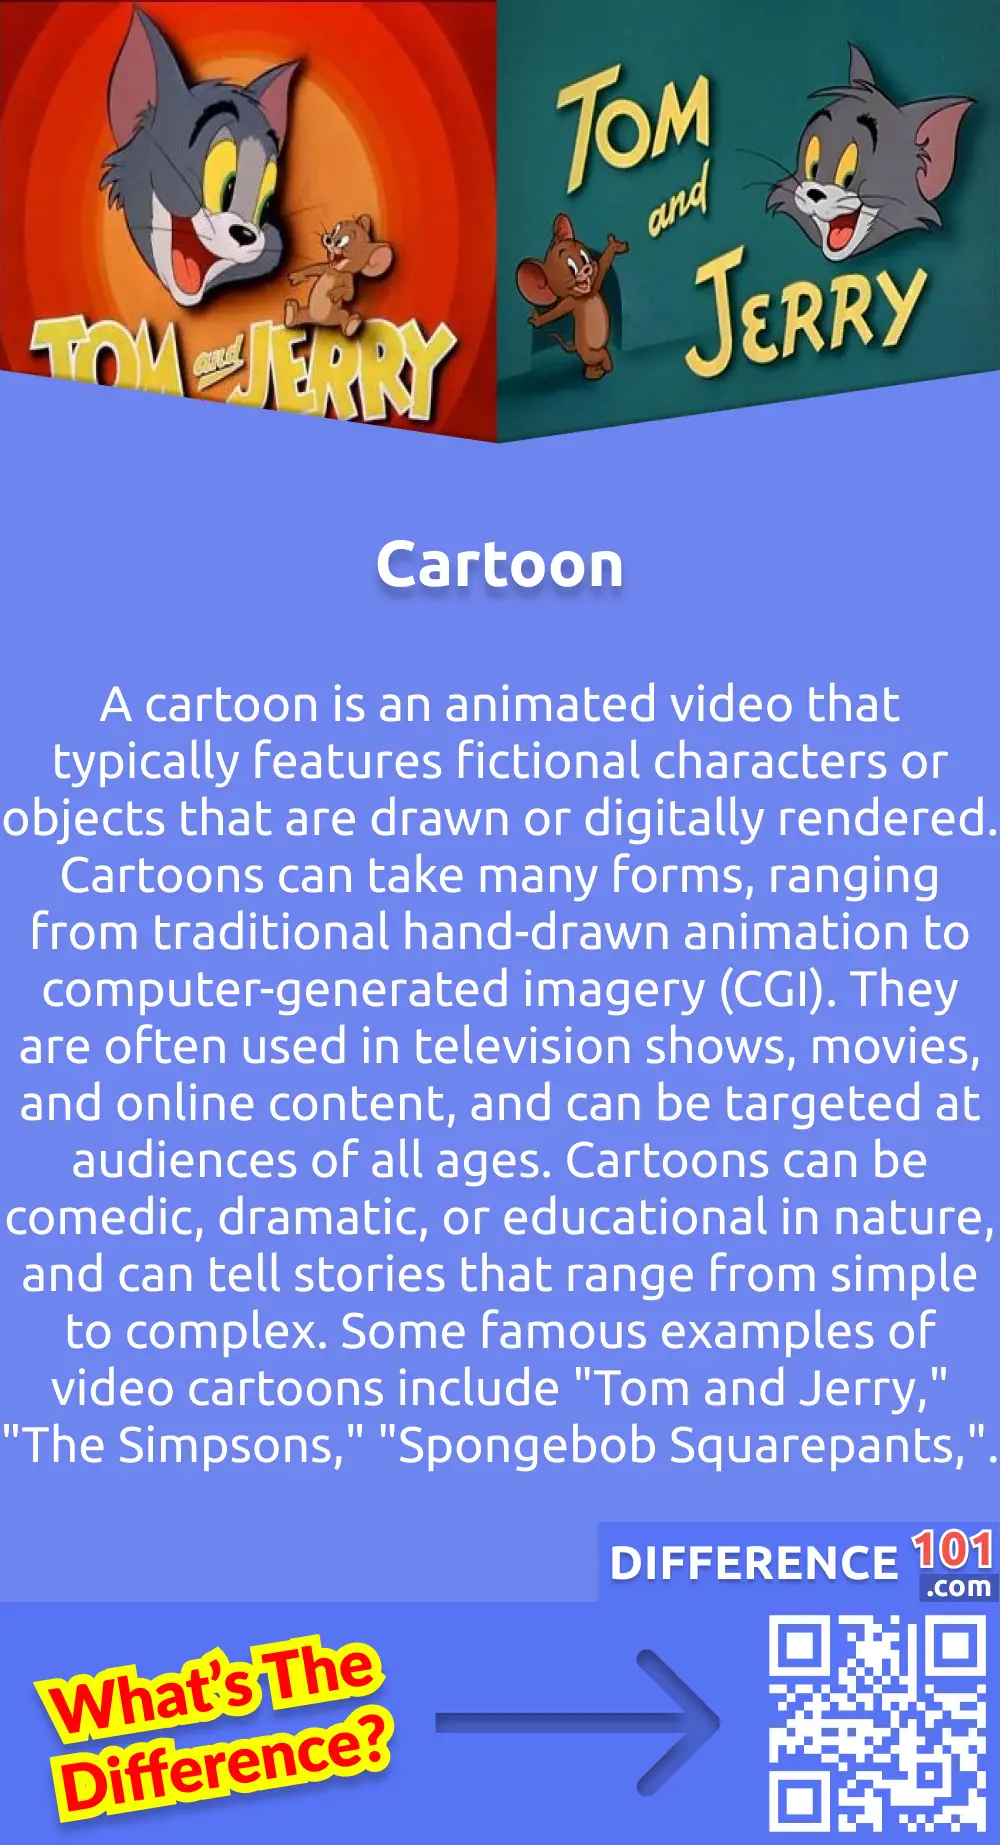 What Is Cartoon? A cartoon is an animated video that typically features fictional characters or objects that are drawn or digitally rendered. Cartoons can take many forms, ranging from traditional hand-drawn animation to computer-generated imagery (CGI). They are often used in television shows, movies, and online content, and can be targeted at audiences of all ages. Cartoons can be comedic, dramatic, or educational in nature, and can tell stories that range from simple to complex. Some famous examples of video cartoons include "Tom and Jerry," "The Simpsons," "Spongebob Squarepants,".
